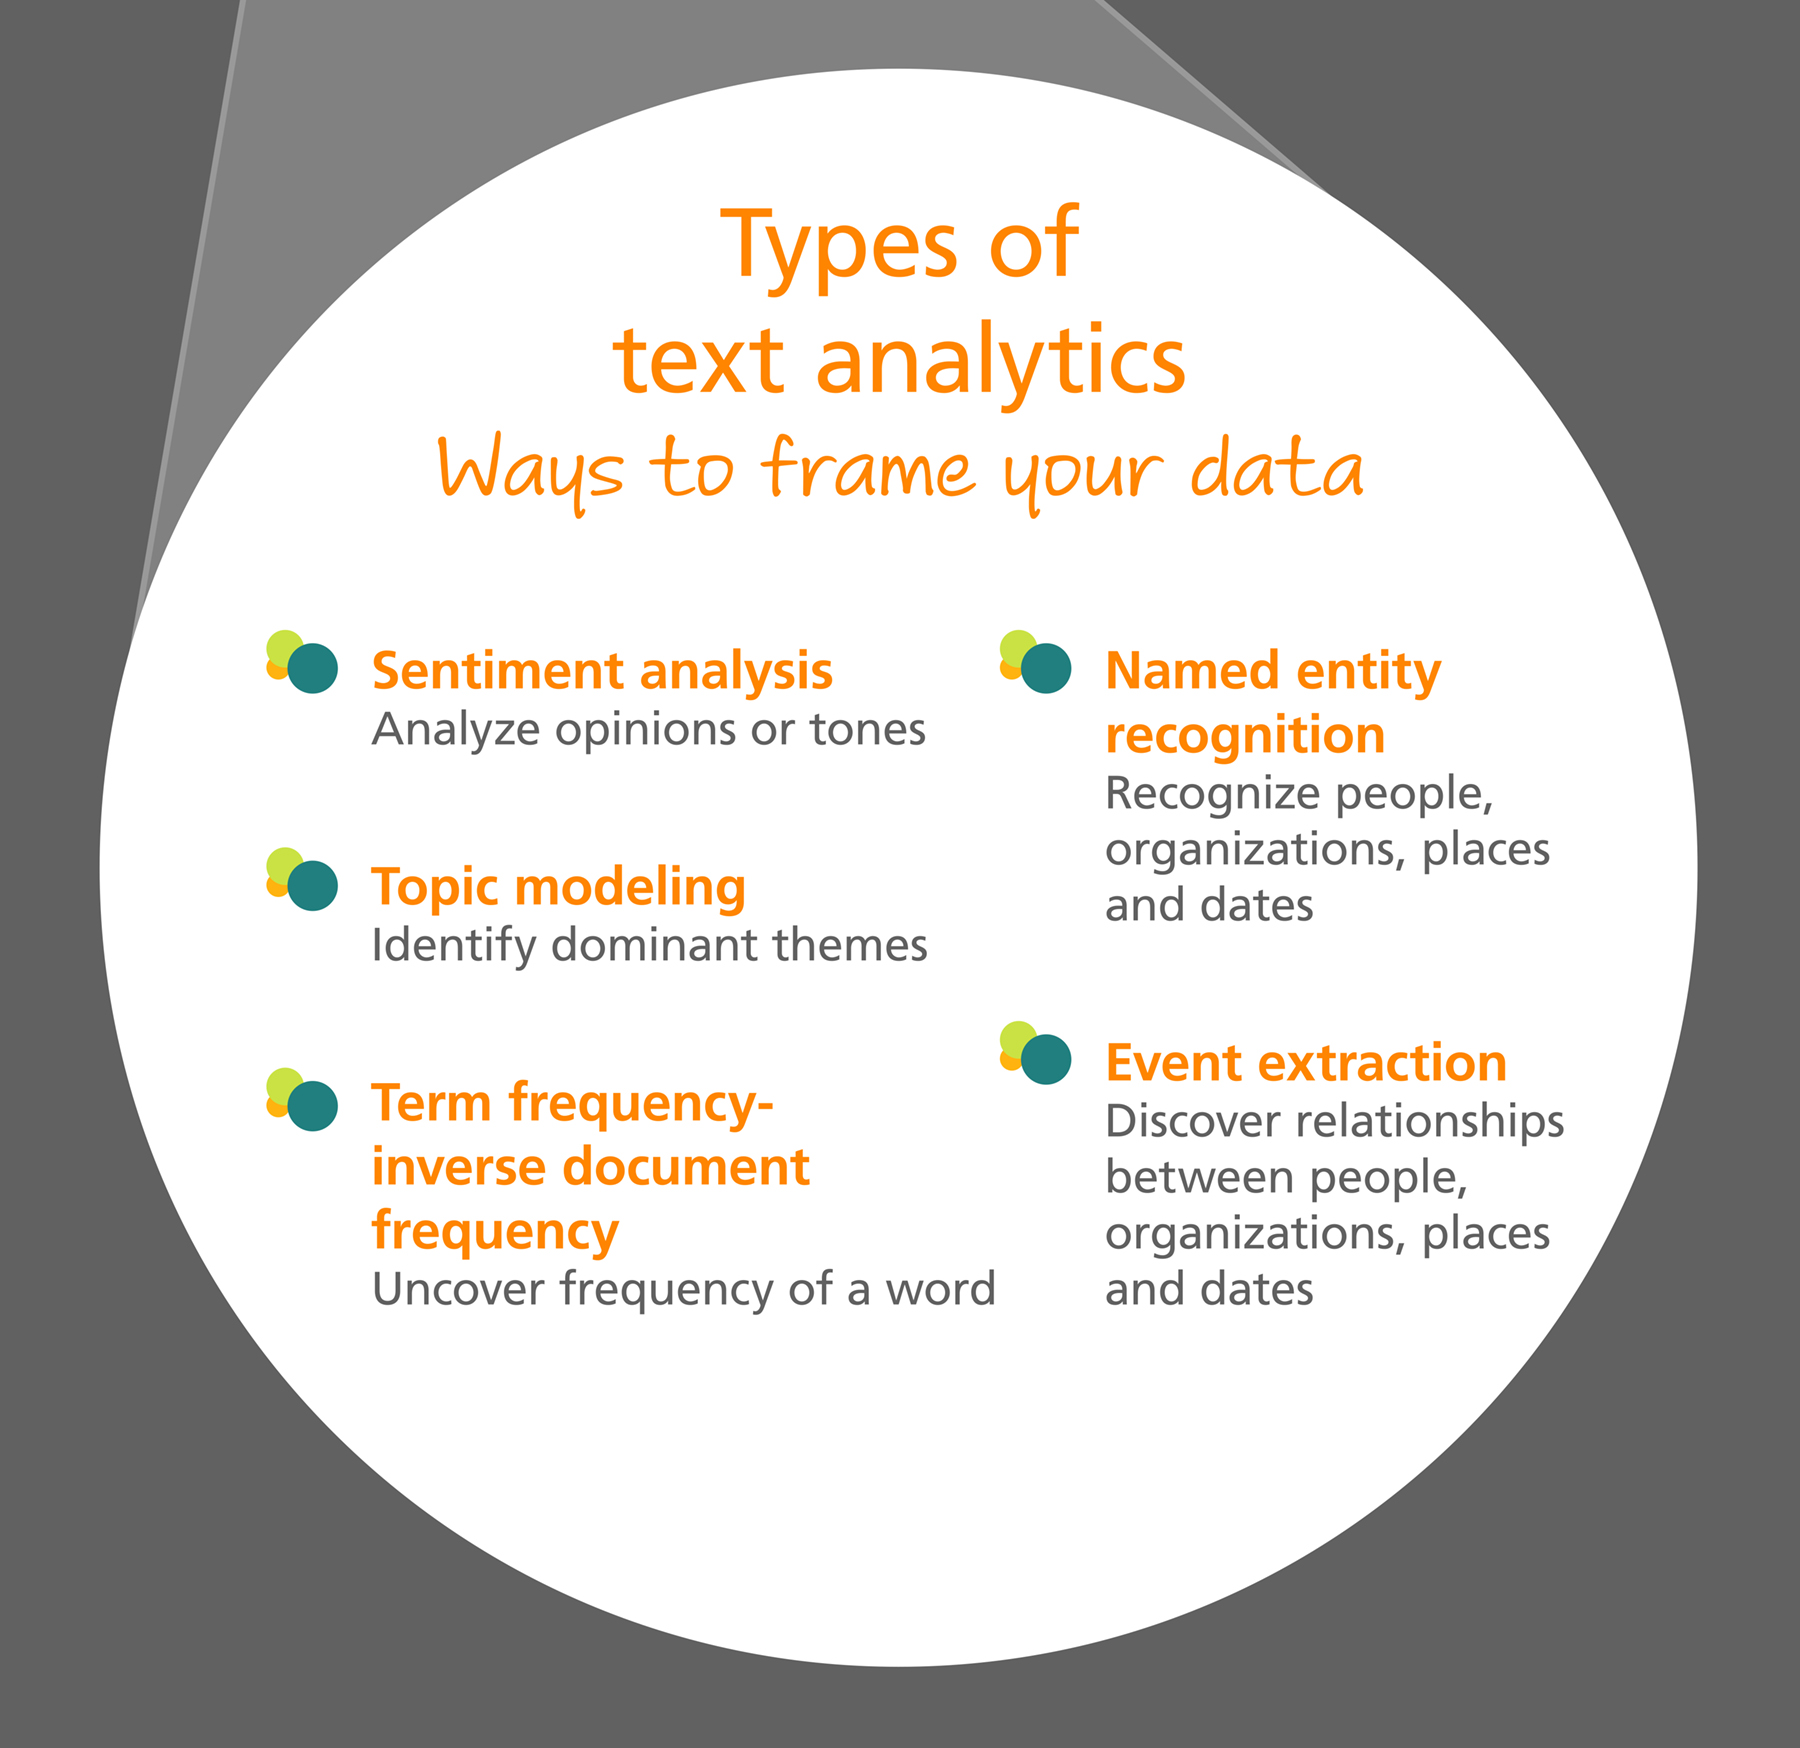 This image explains the types of text analytics.